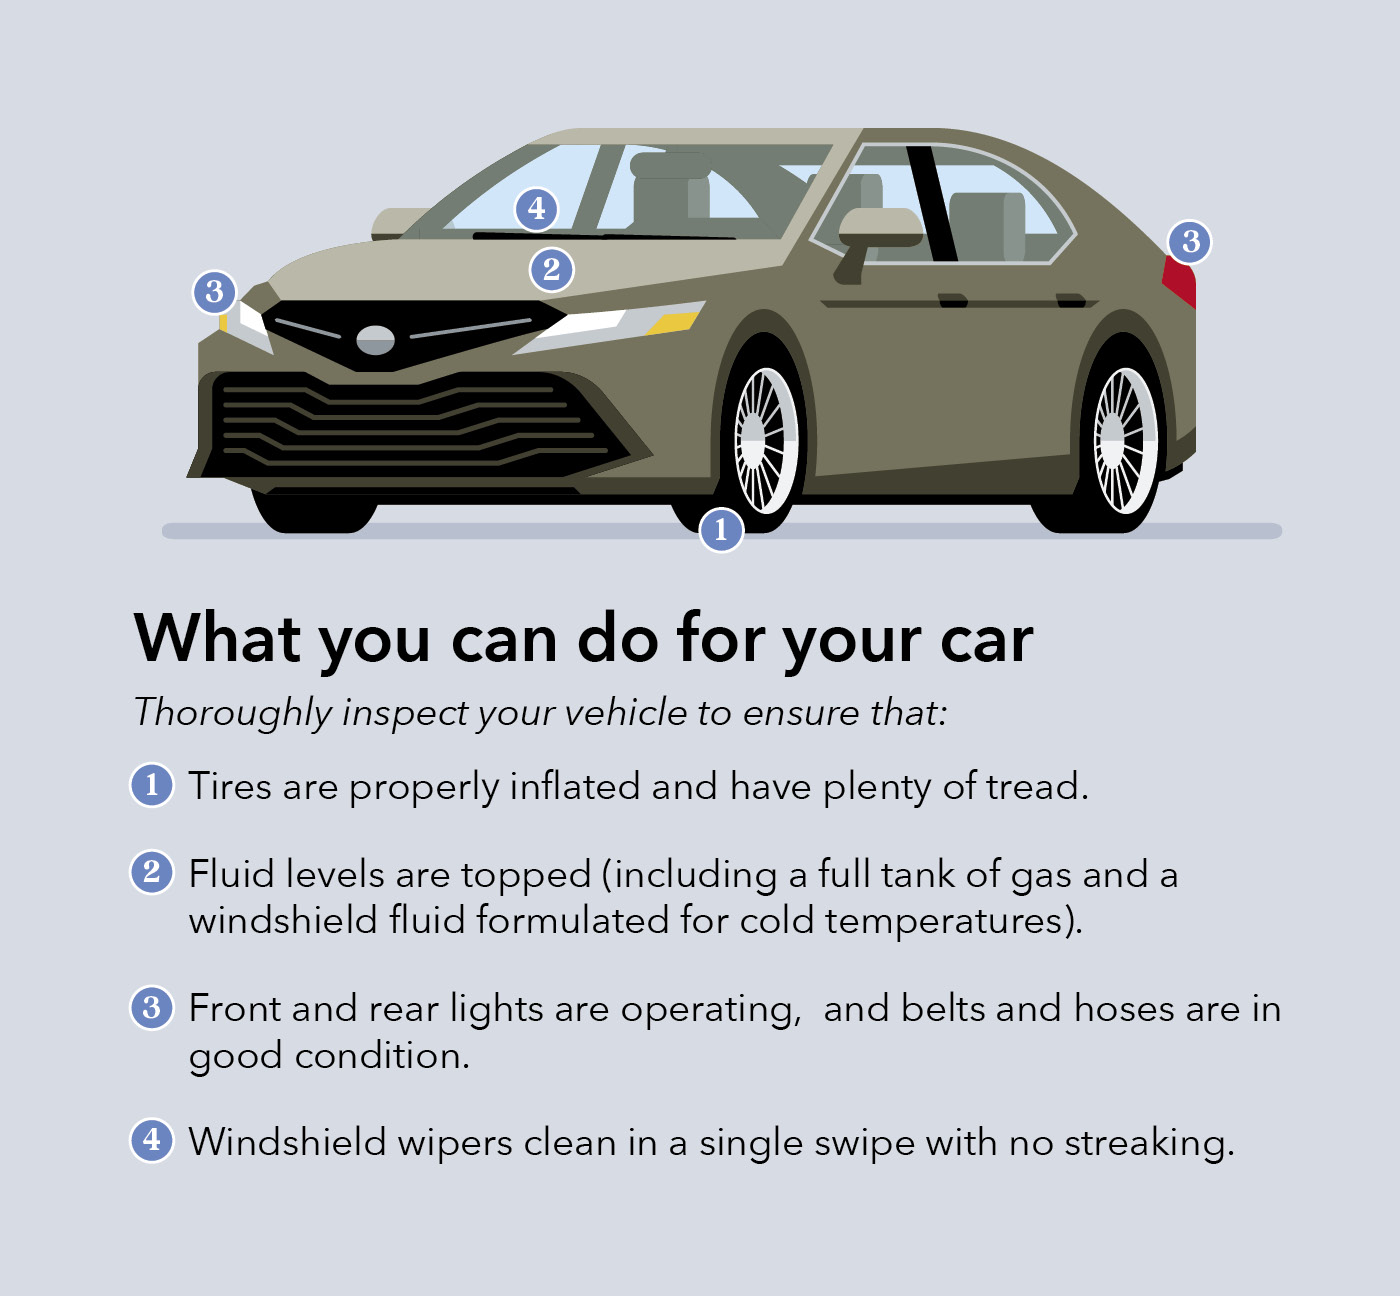 Infographic about how to make sure your car is prepared for driving in extremely cold weather